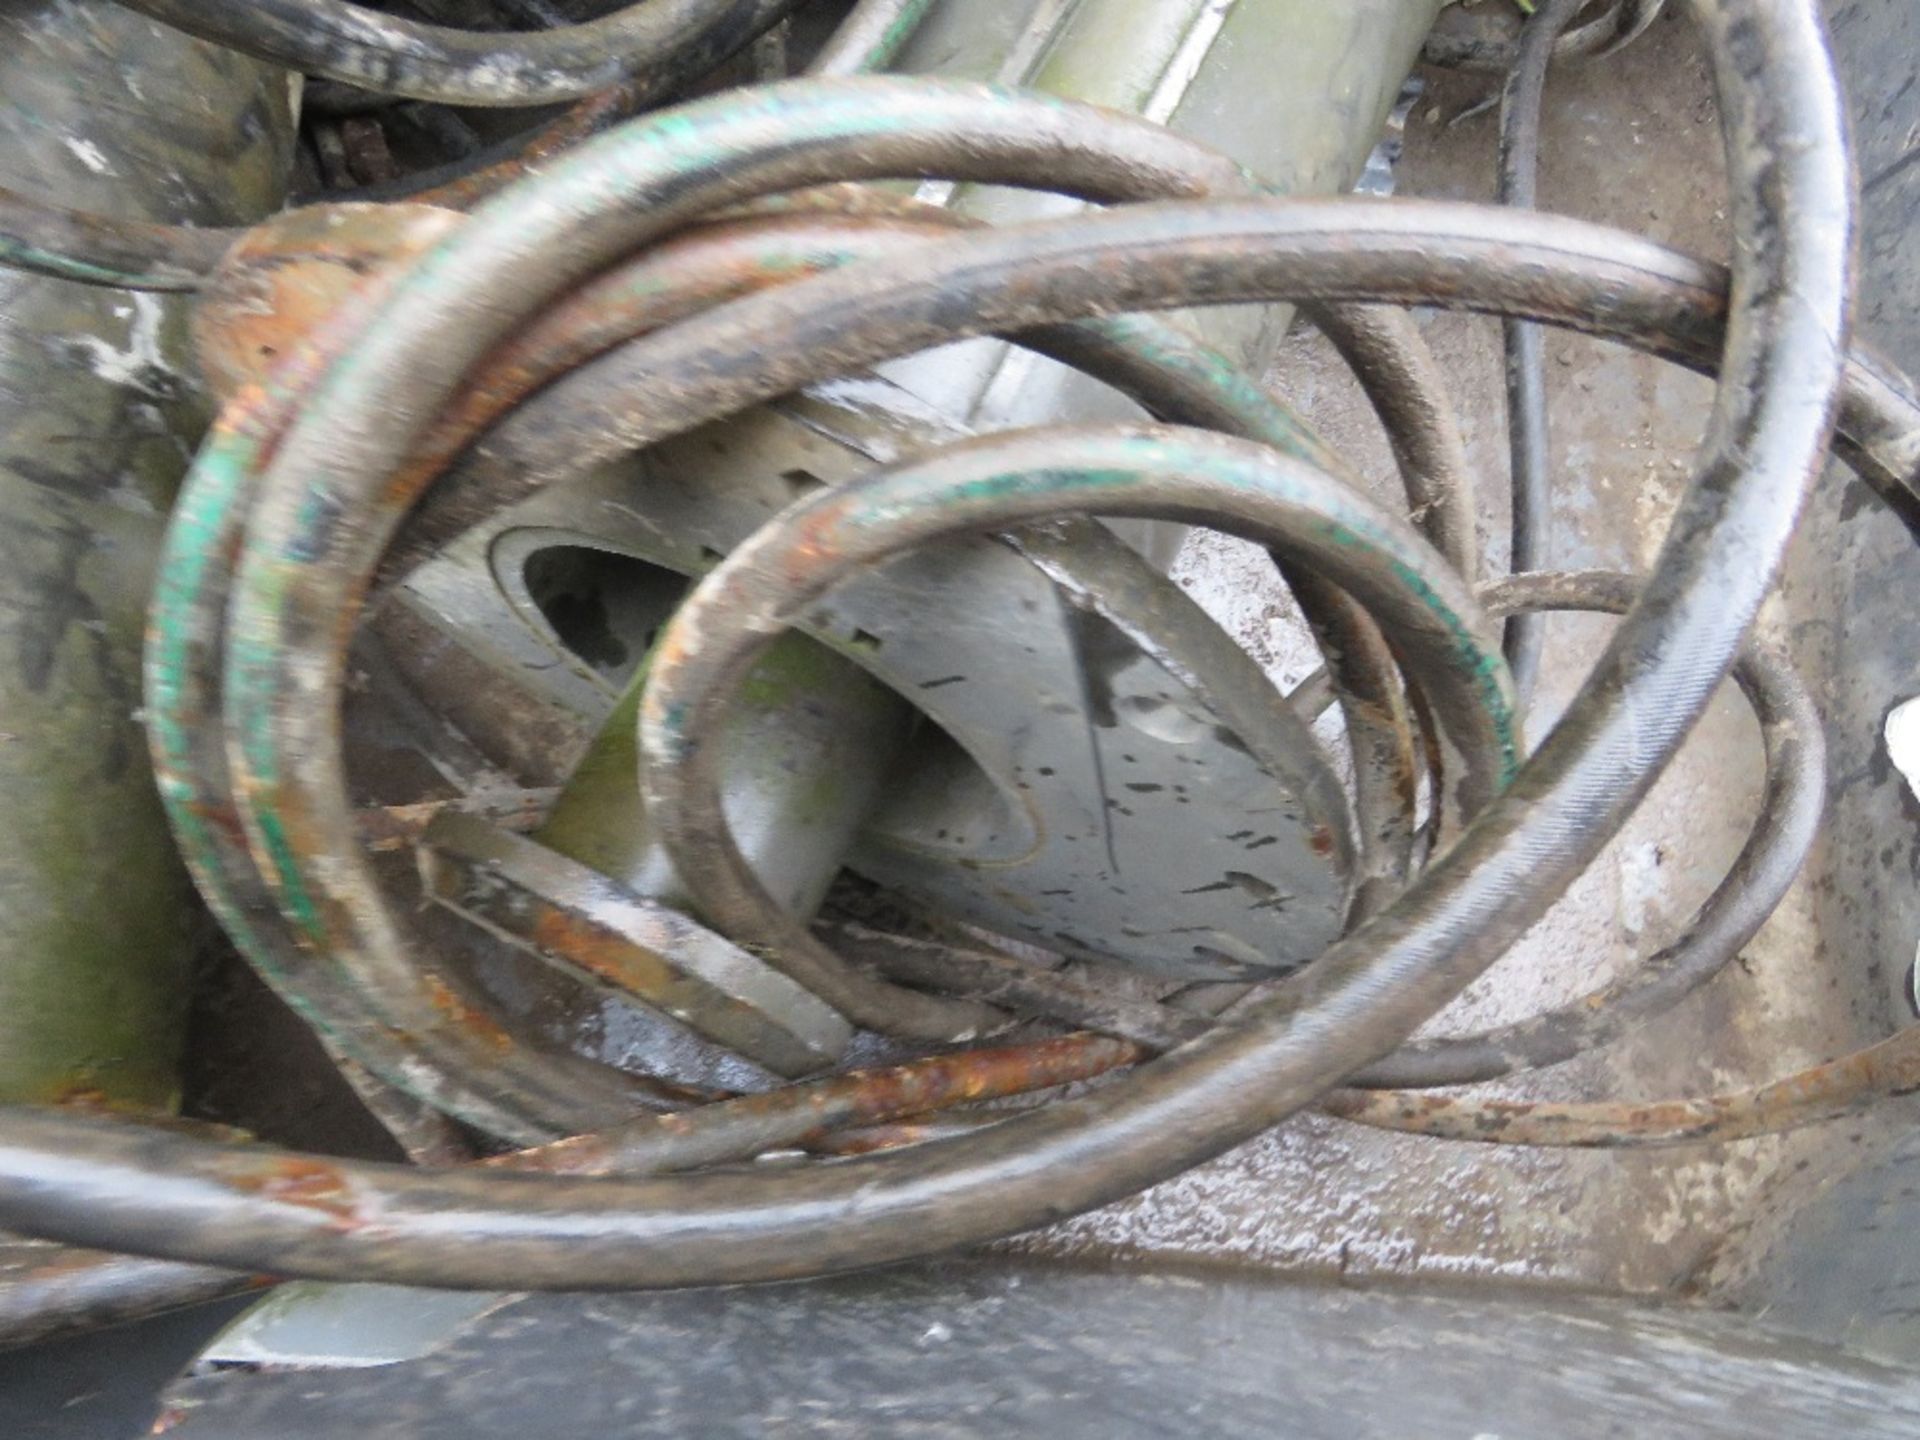 3 X HEAVY DUTY HYDRAULIC RAMS WITH HOSES AS SHOWN. - Image 3 of 4